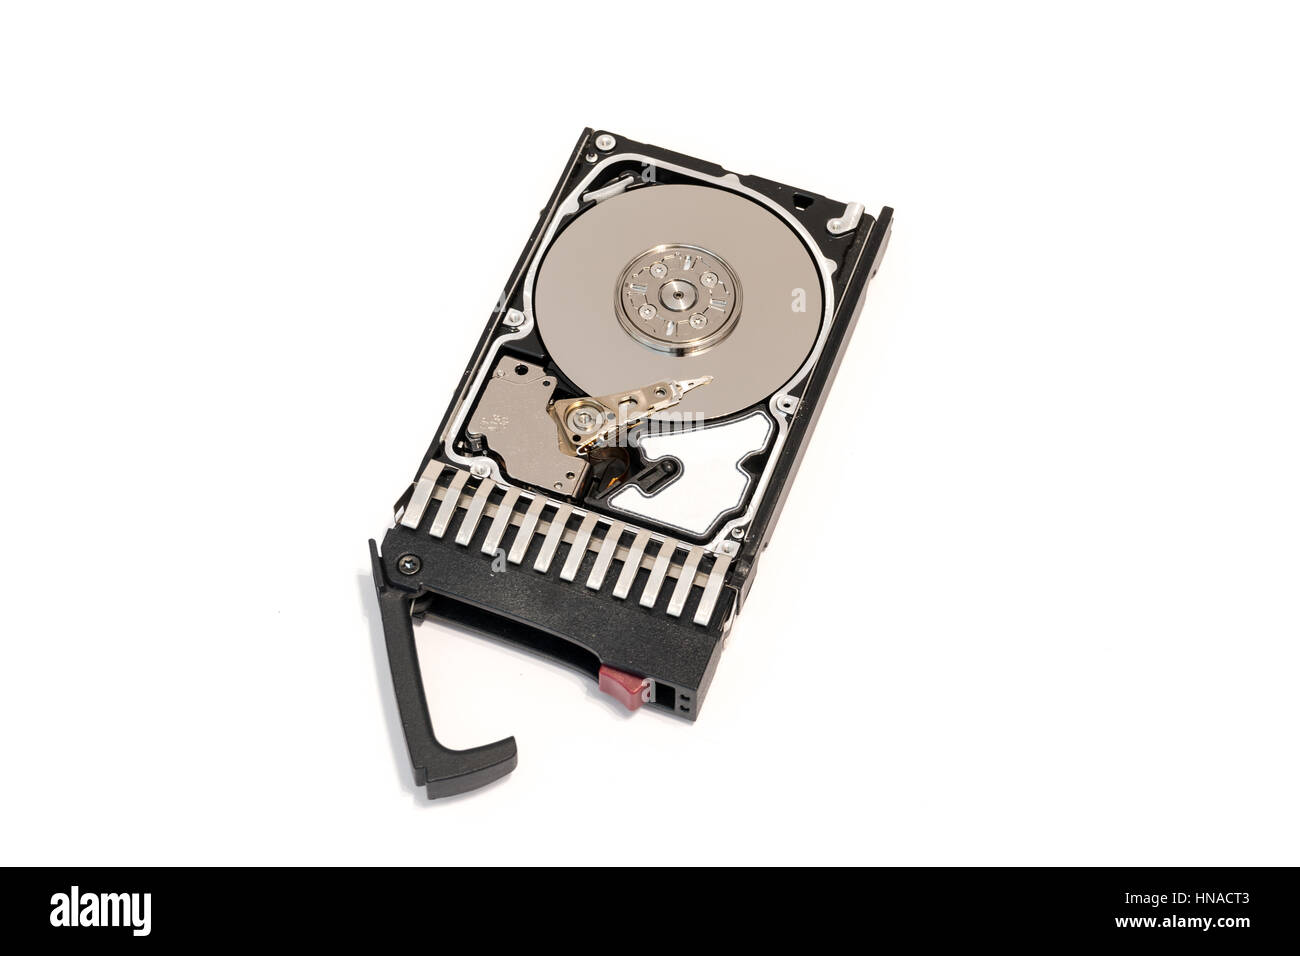 Close up inside of hot plug SAS computer disk drive HDD in tray isolated on white background Stock Photo